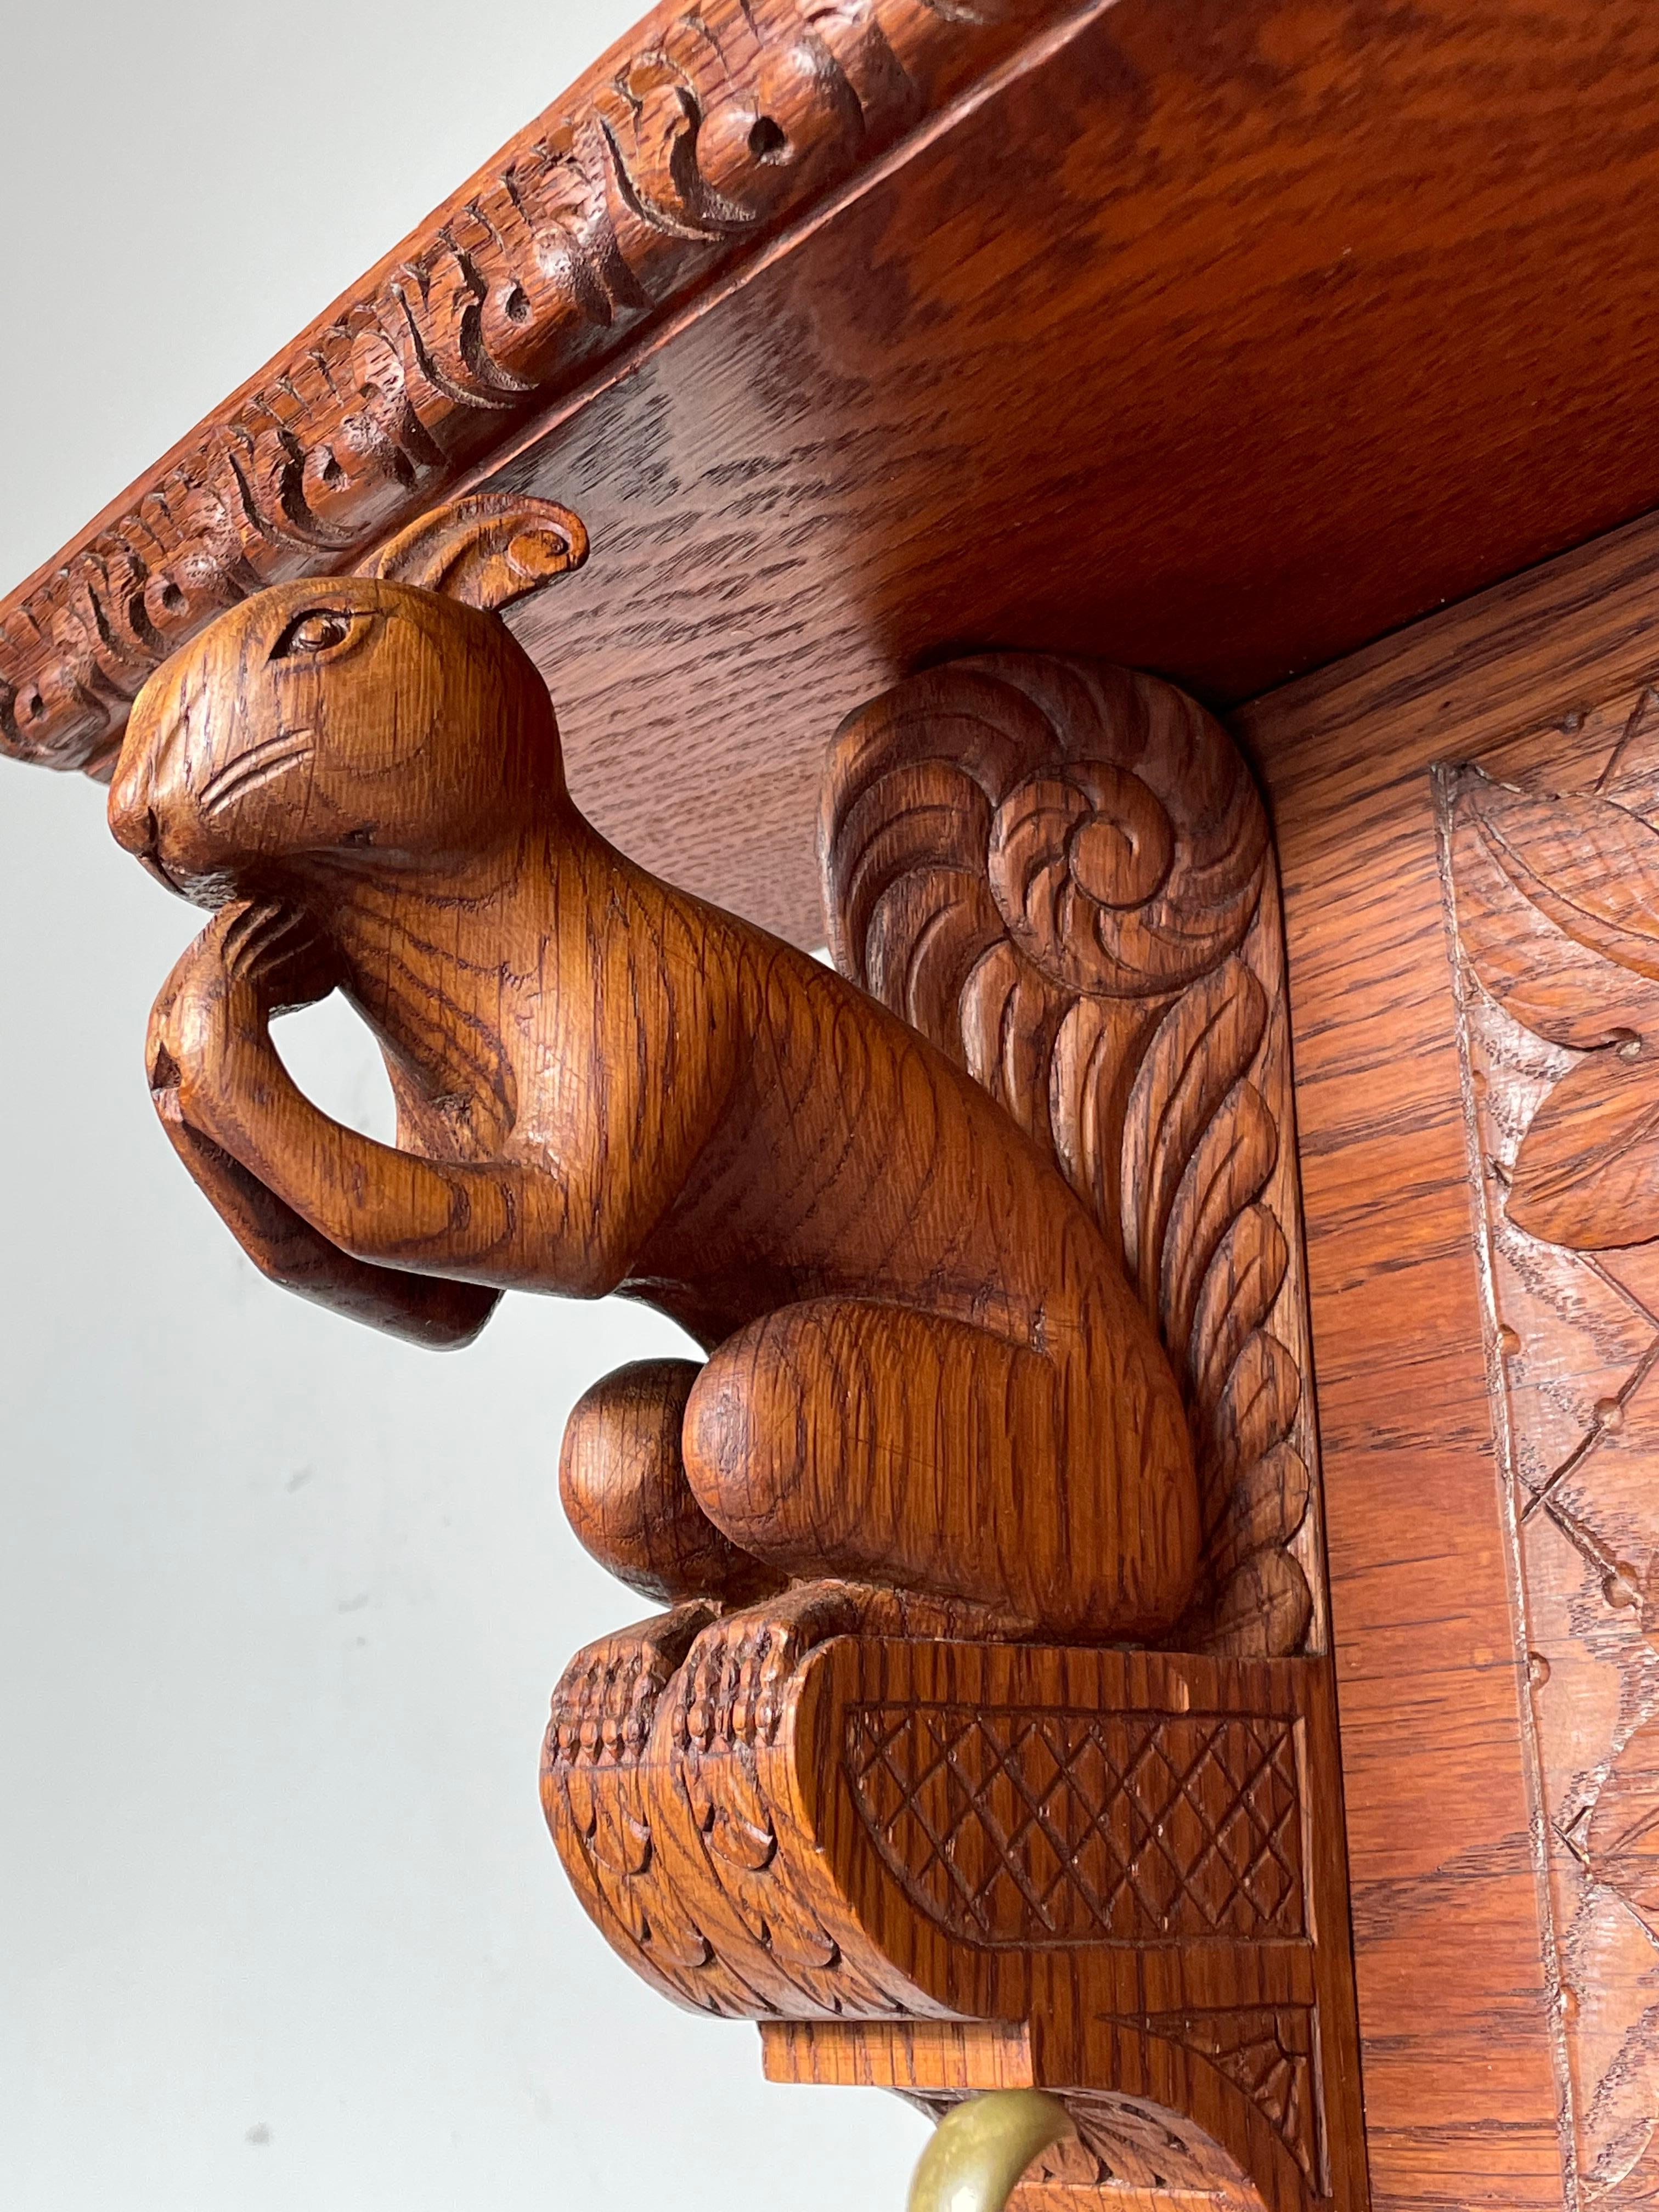 One of a kind coatrack with hand carved squirrels and grape branches.

With the Arts and Crafts era being one of our favourite, we are always thrilled to find antiques from that era. Especially ones that we have never seen before. We were thrilled